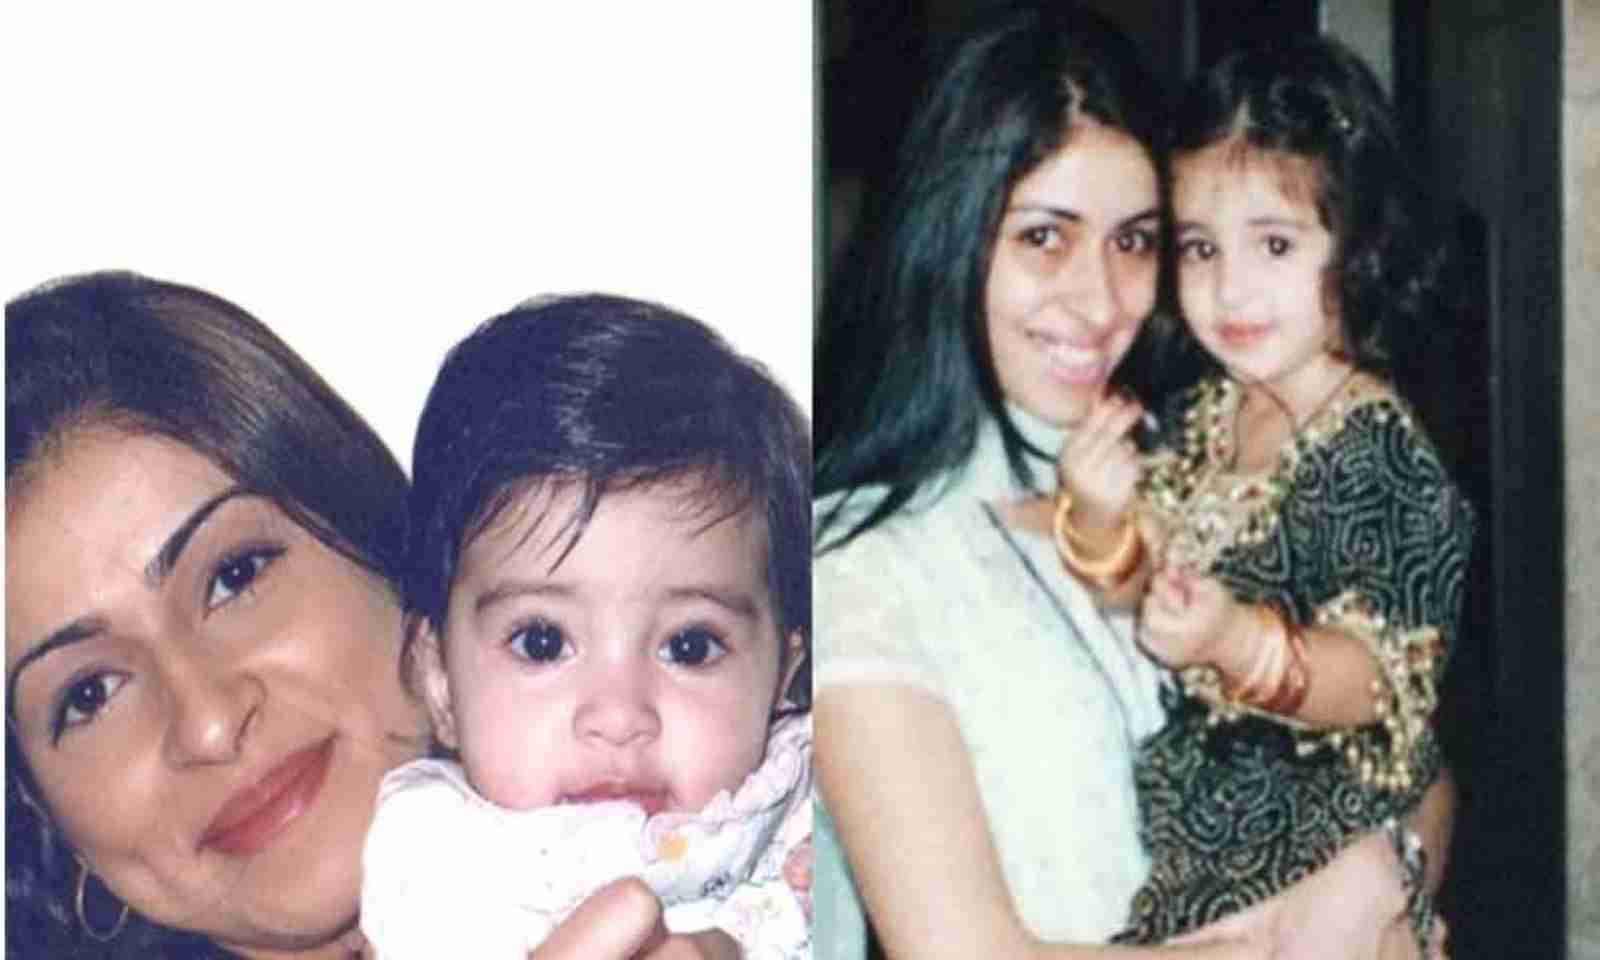 Ananya Pandey S Mom Bhavana Shares An Adorable Childhood Video Ahead Of Her Daughter S Birthday Chunky pandey's daughter and latest bollywood newcomer ananya pandey is no doubt hottest star kid. ananya pandey s mom bhavana shares an